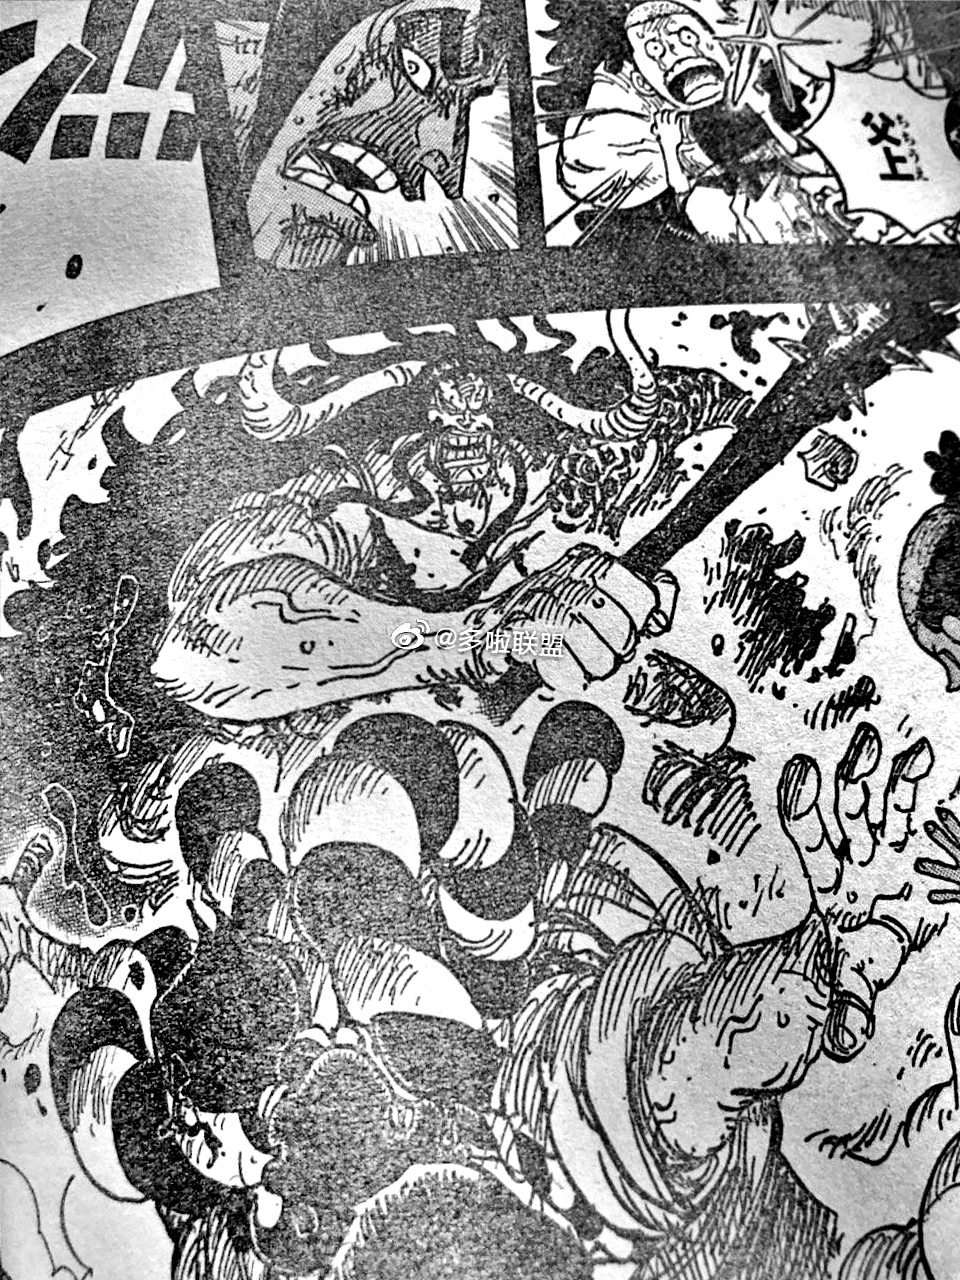 Discover Diary One Piece Chapter 970 Spoilers Onepiece Onepiece970 Onepiecechapter970 Onepiecemanga Discoverdiary T Co Olitznn8au Twitter